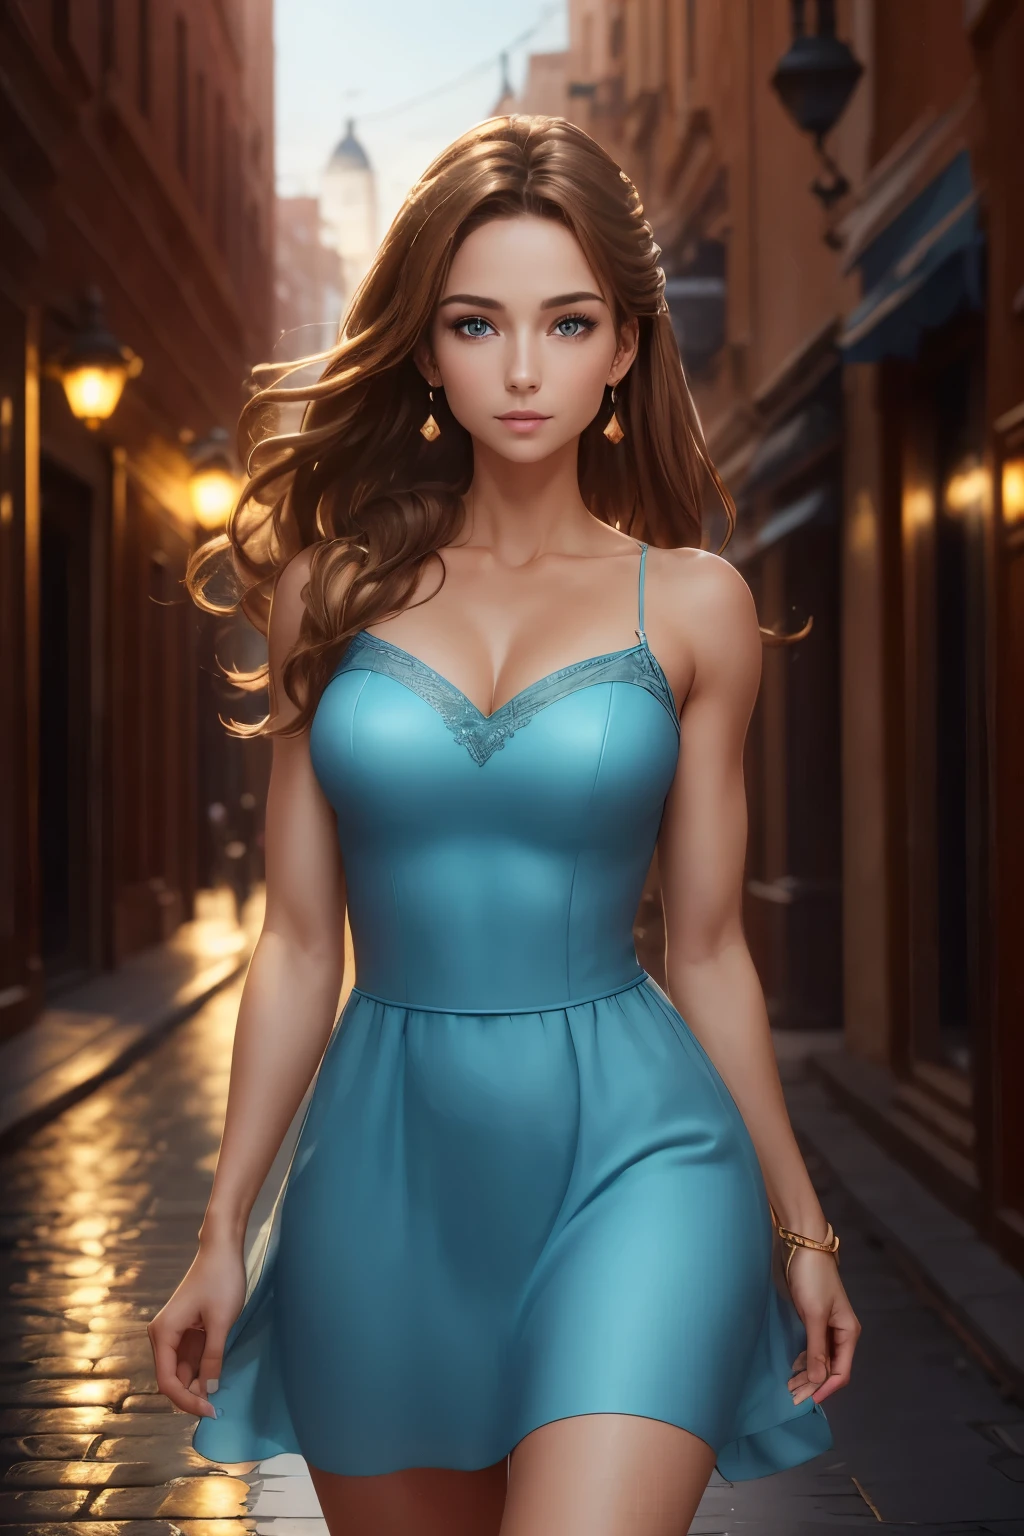 (Best quality, 8K, Masterpiece: 1.3), Clear focus: 1.2, Beauty: 1.4, Abs: 1.1, Brown hair, Aqua dress: 1.4, Night outdoors: 1.1, City streets, fine face and eyes, double eyelids. Realistic lighting added, pay attention to adjust the proportions.